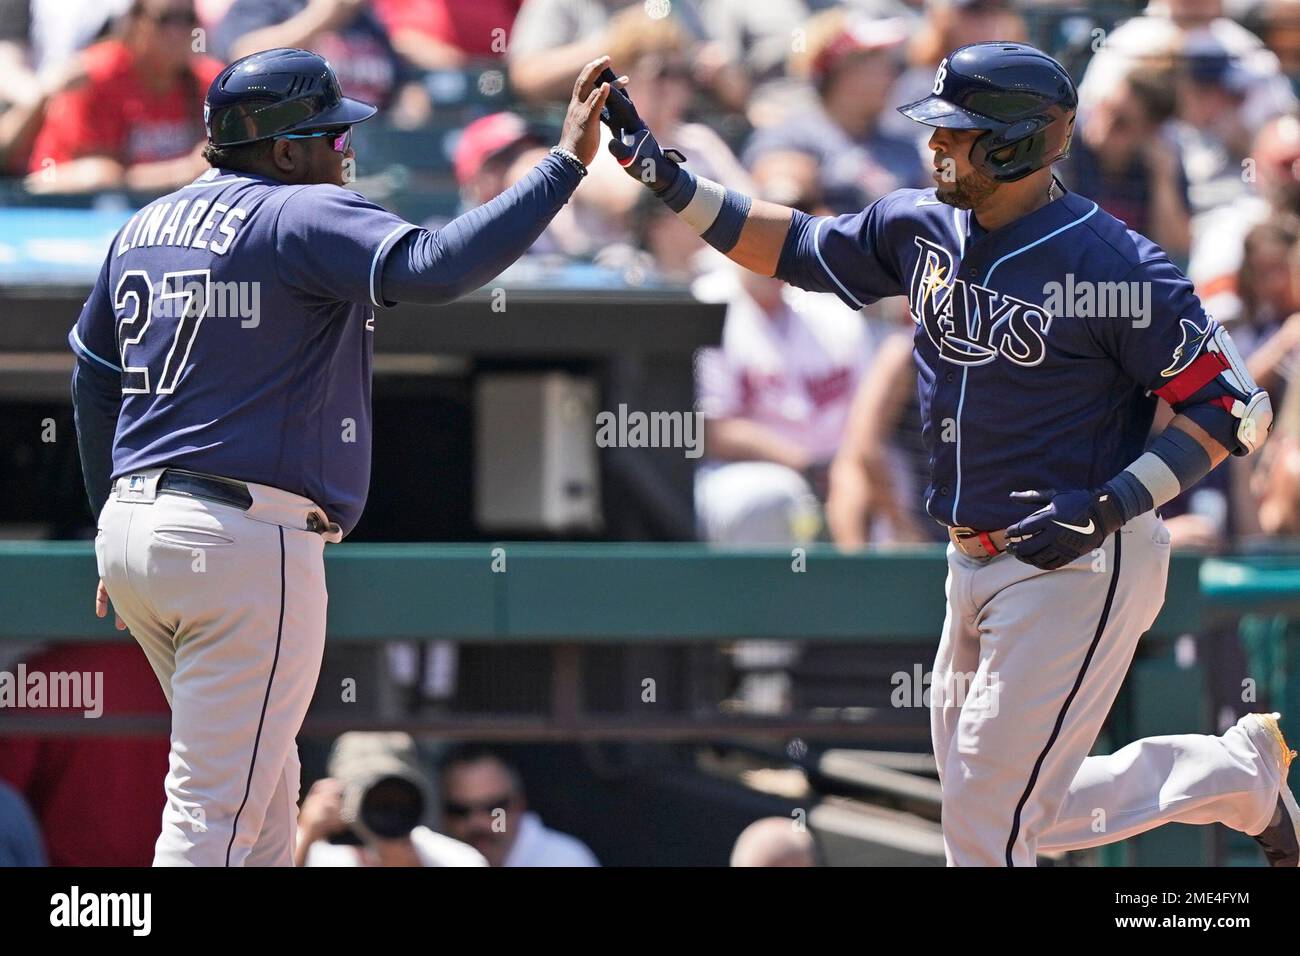 Tampa Bay Rays' Nelson Cruz is congratulated by third base coach